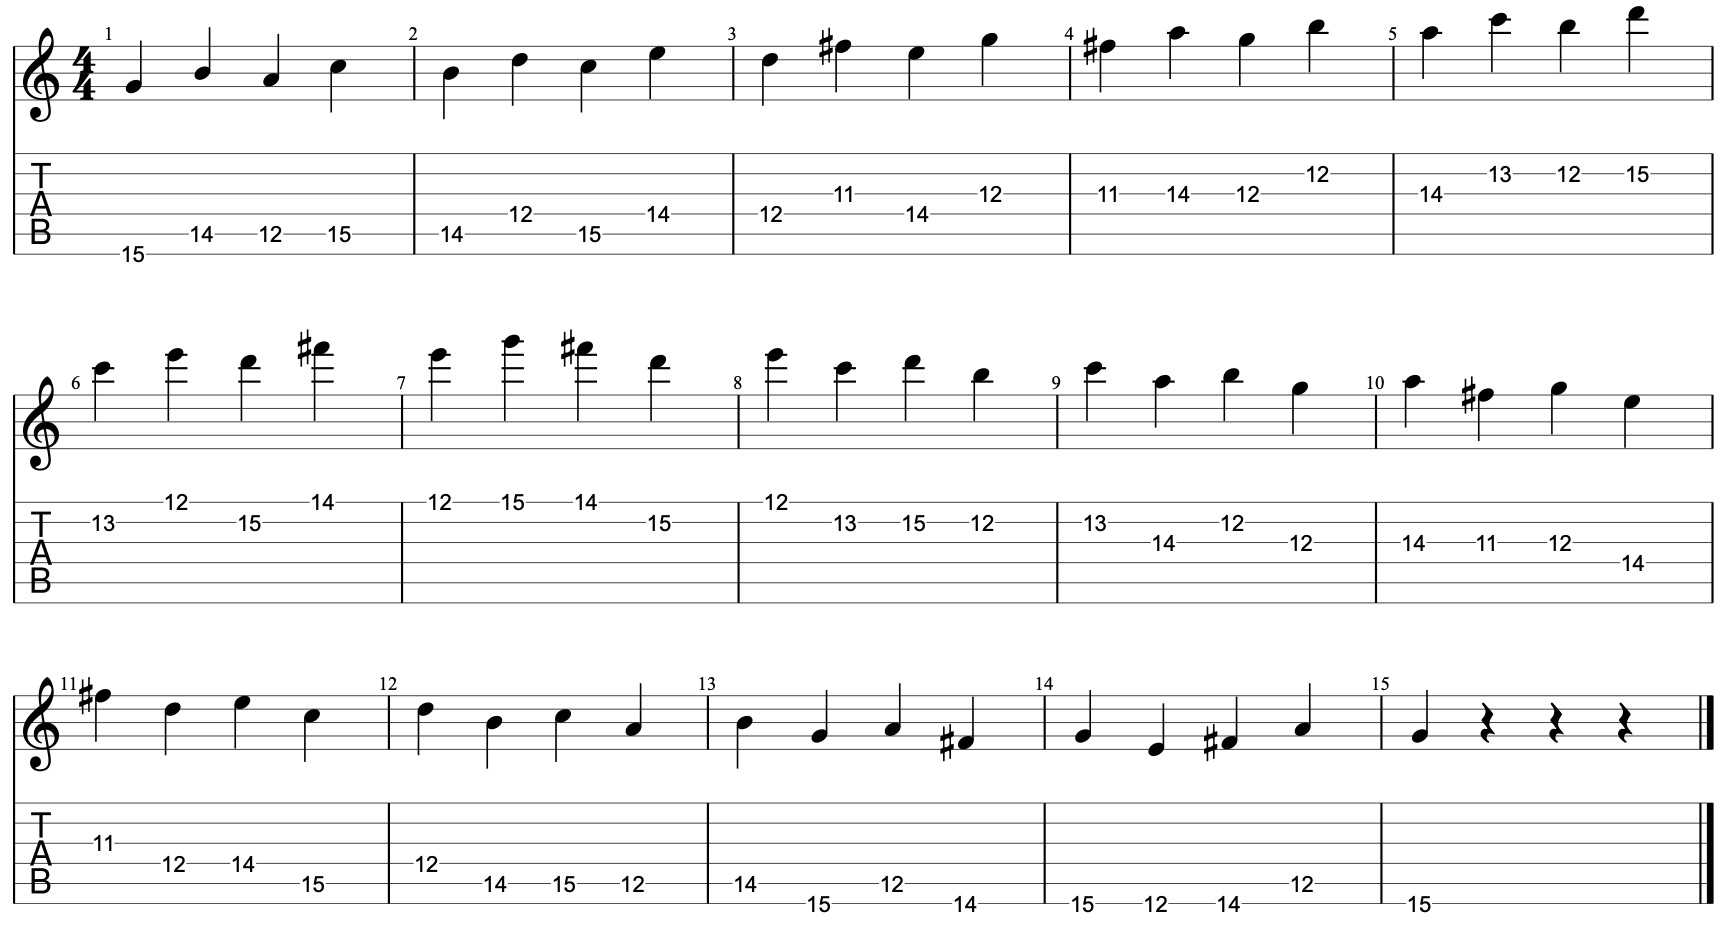 3rds Intervals over 5 Major Scale Shapes/Positions